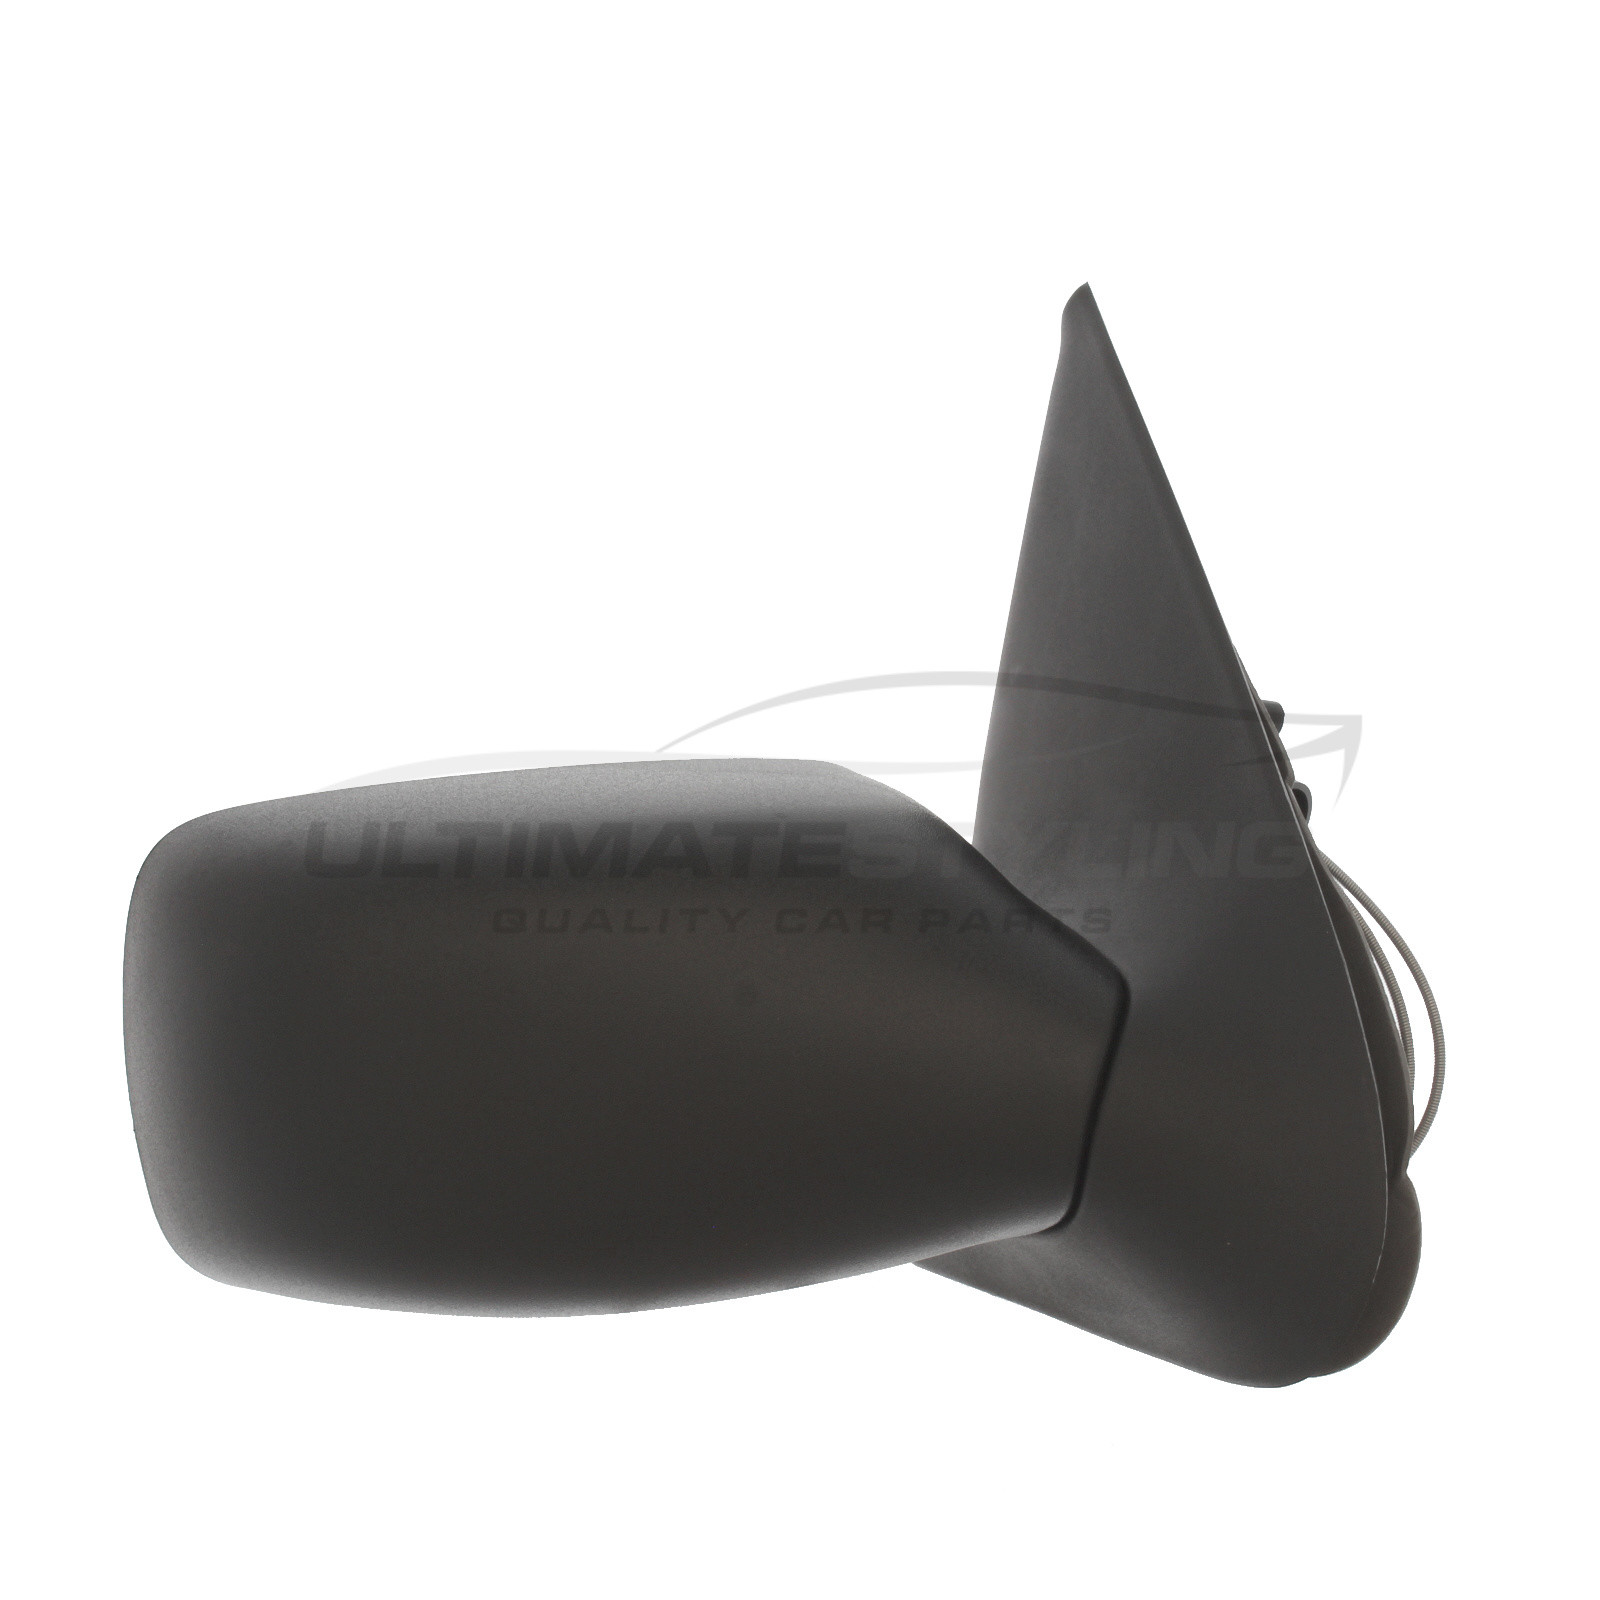 Ford Fiesta, Mazda 121 Wing Mirror / Door Mirror - Drivers Side (RH) - Cable adjustment - Non-Heated Glass - Black